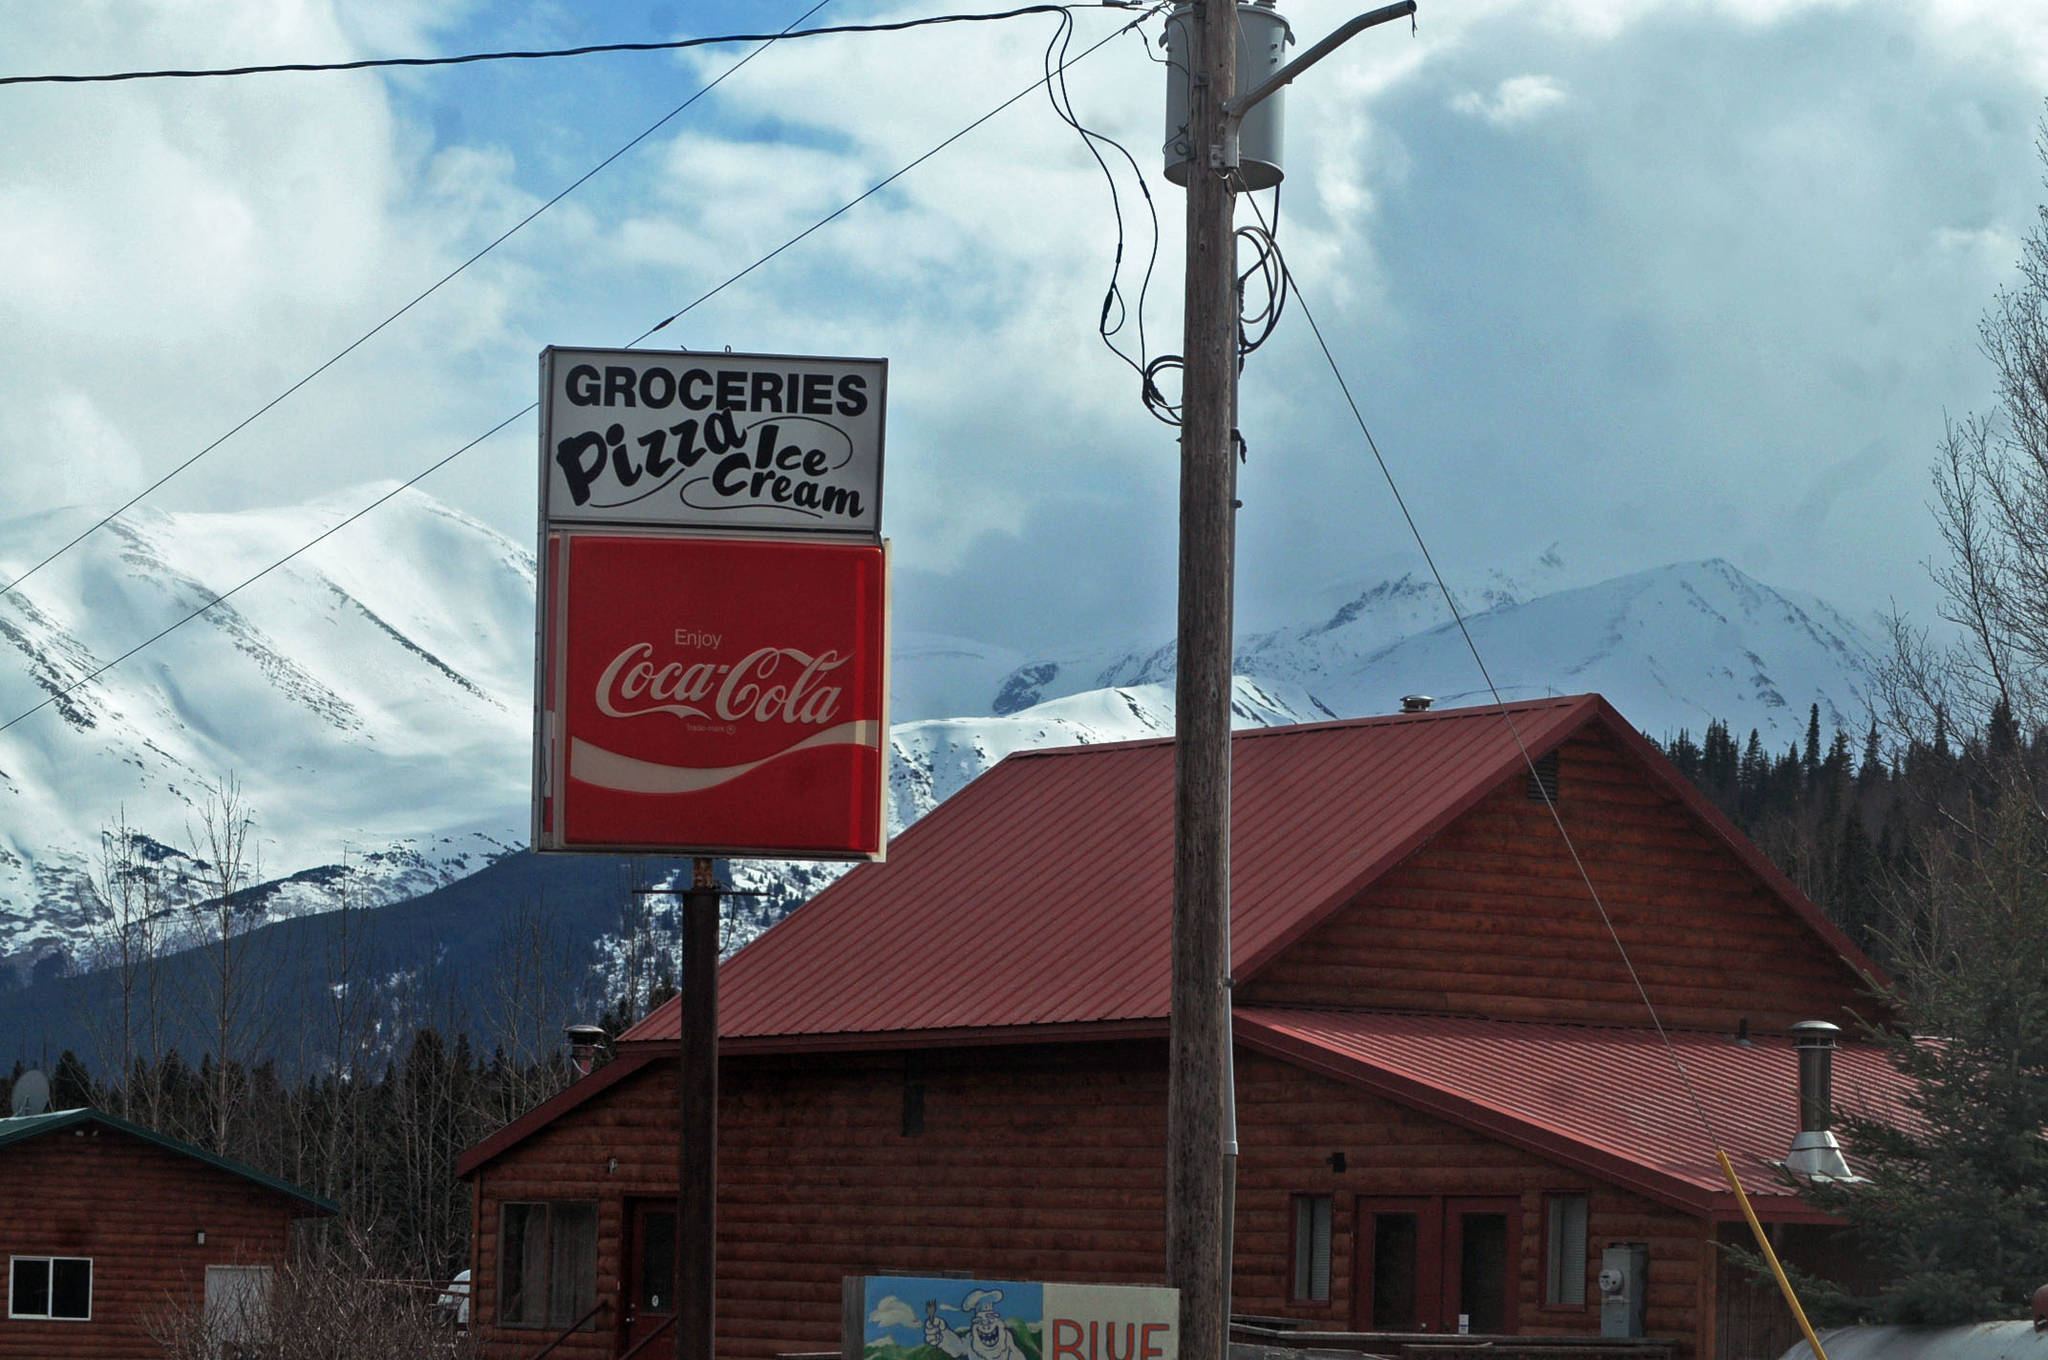 The mountains loom over a grocery store on the Sterling Highway on Wednesday, April 11, 2018 in Cooper Landing, Alaska. The Sterling Highway, the main corridor to and from the Kenai Peninsula, winds through the little community of Cooper Landing, often bringing dense traffic and car accidents with it, particularly in the summer. (Photo by Elizabeth Earl/Peninsula Clarion, file)